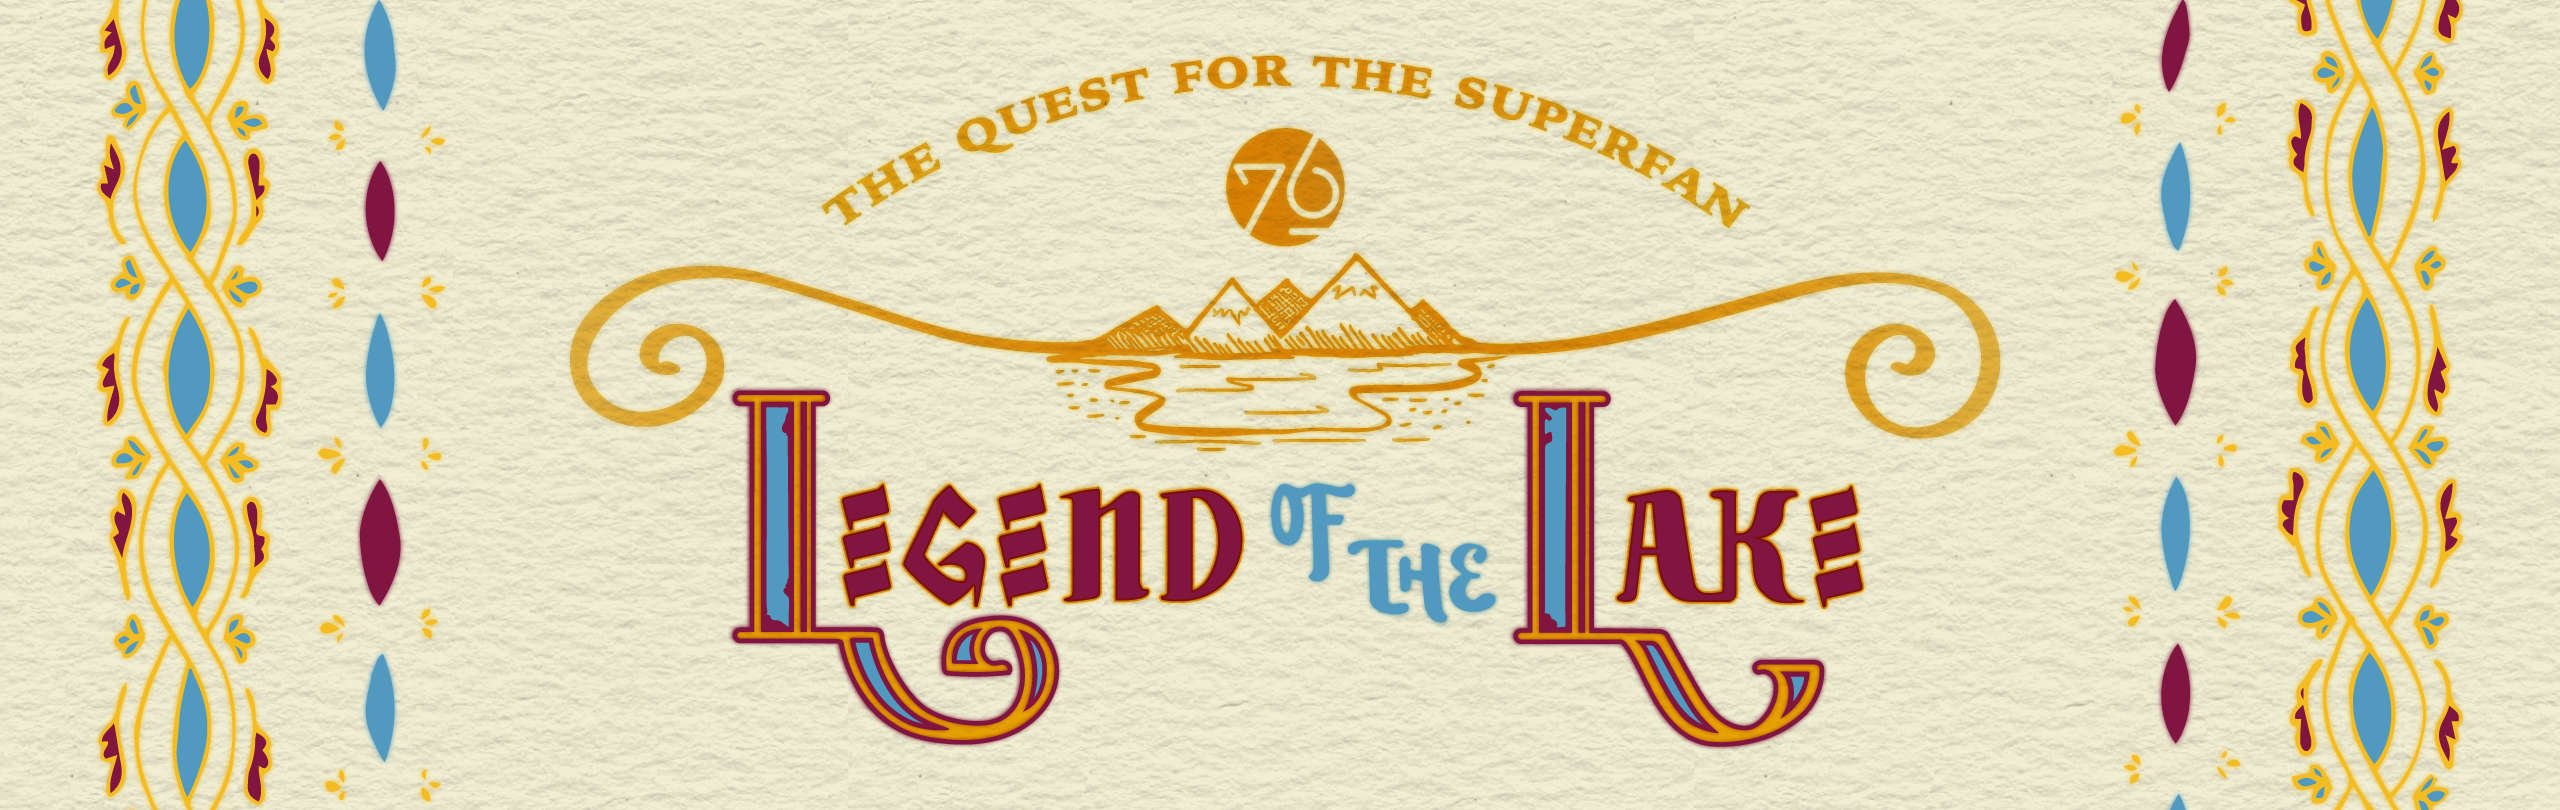 The quest for the superfan. Legend of the lake.